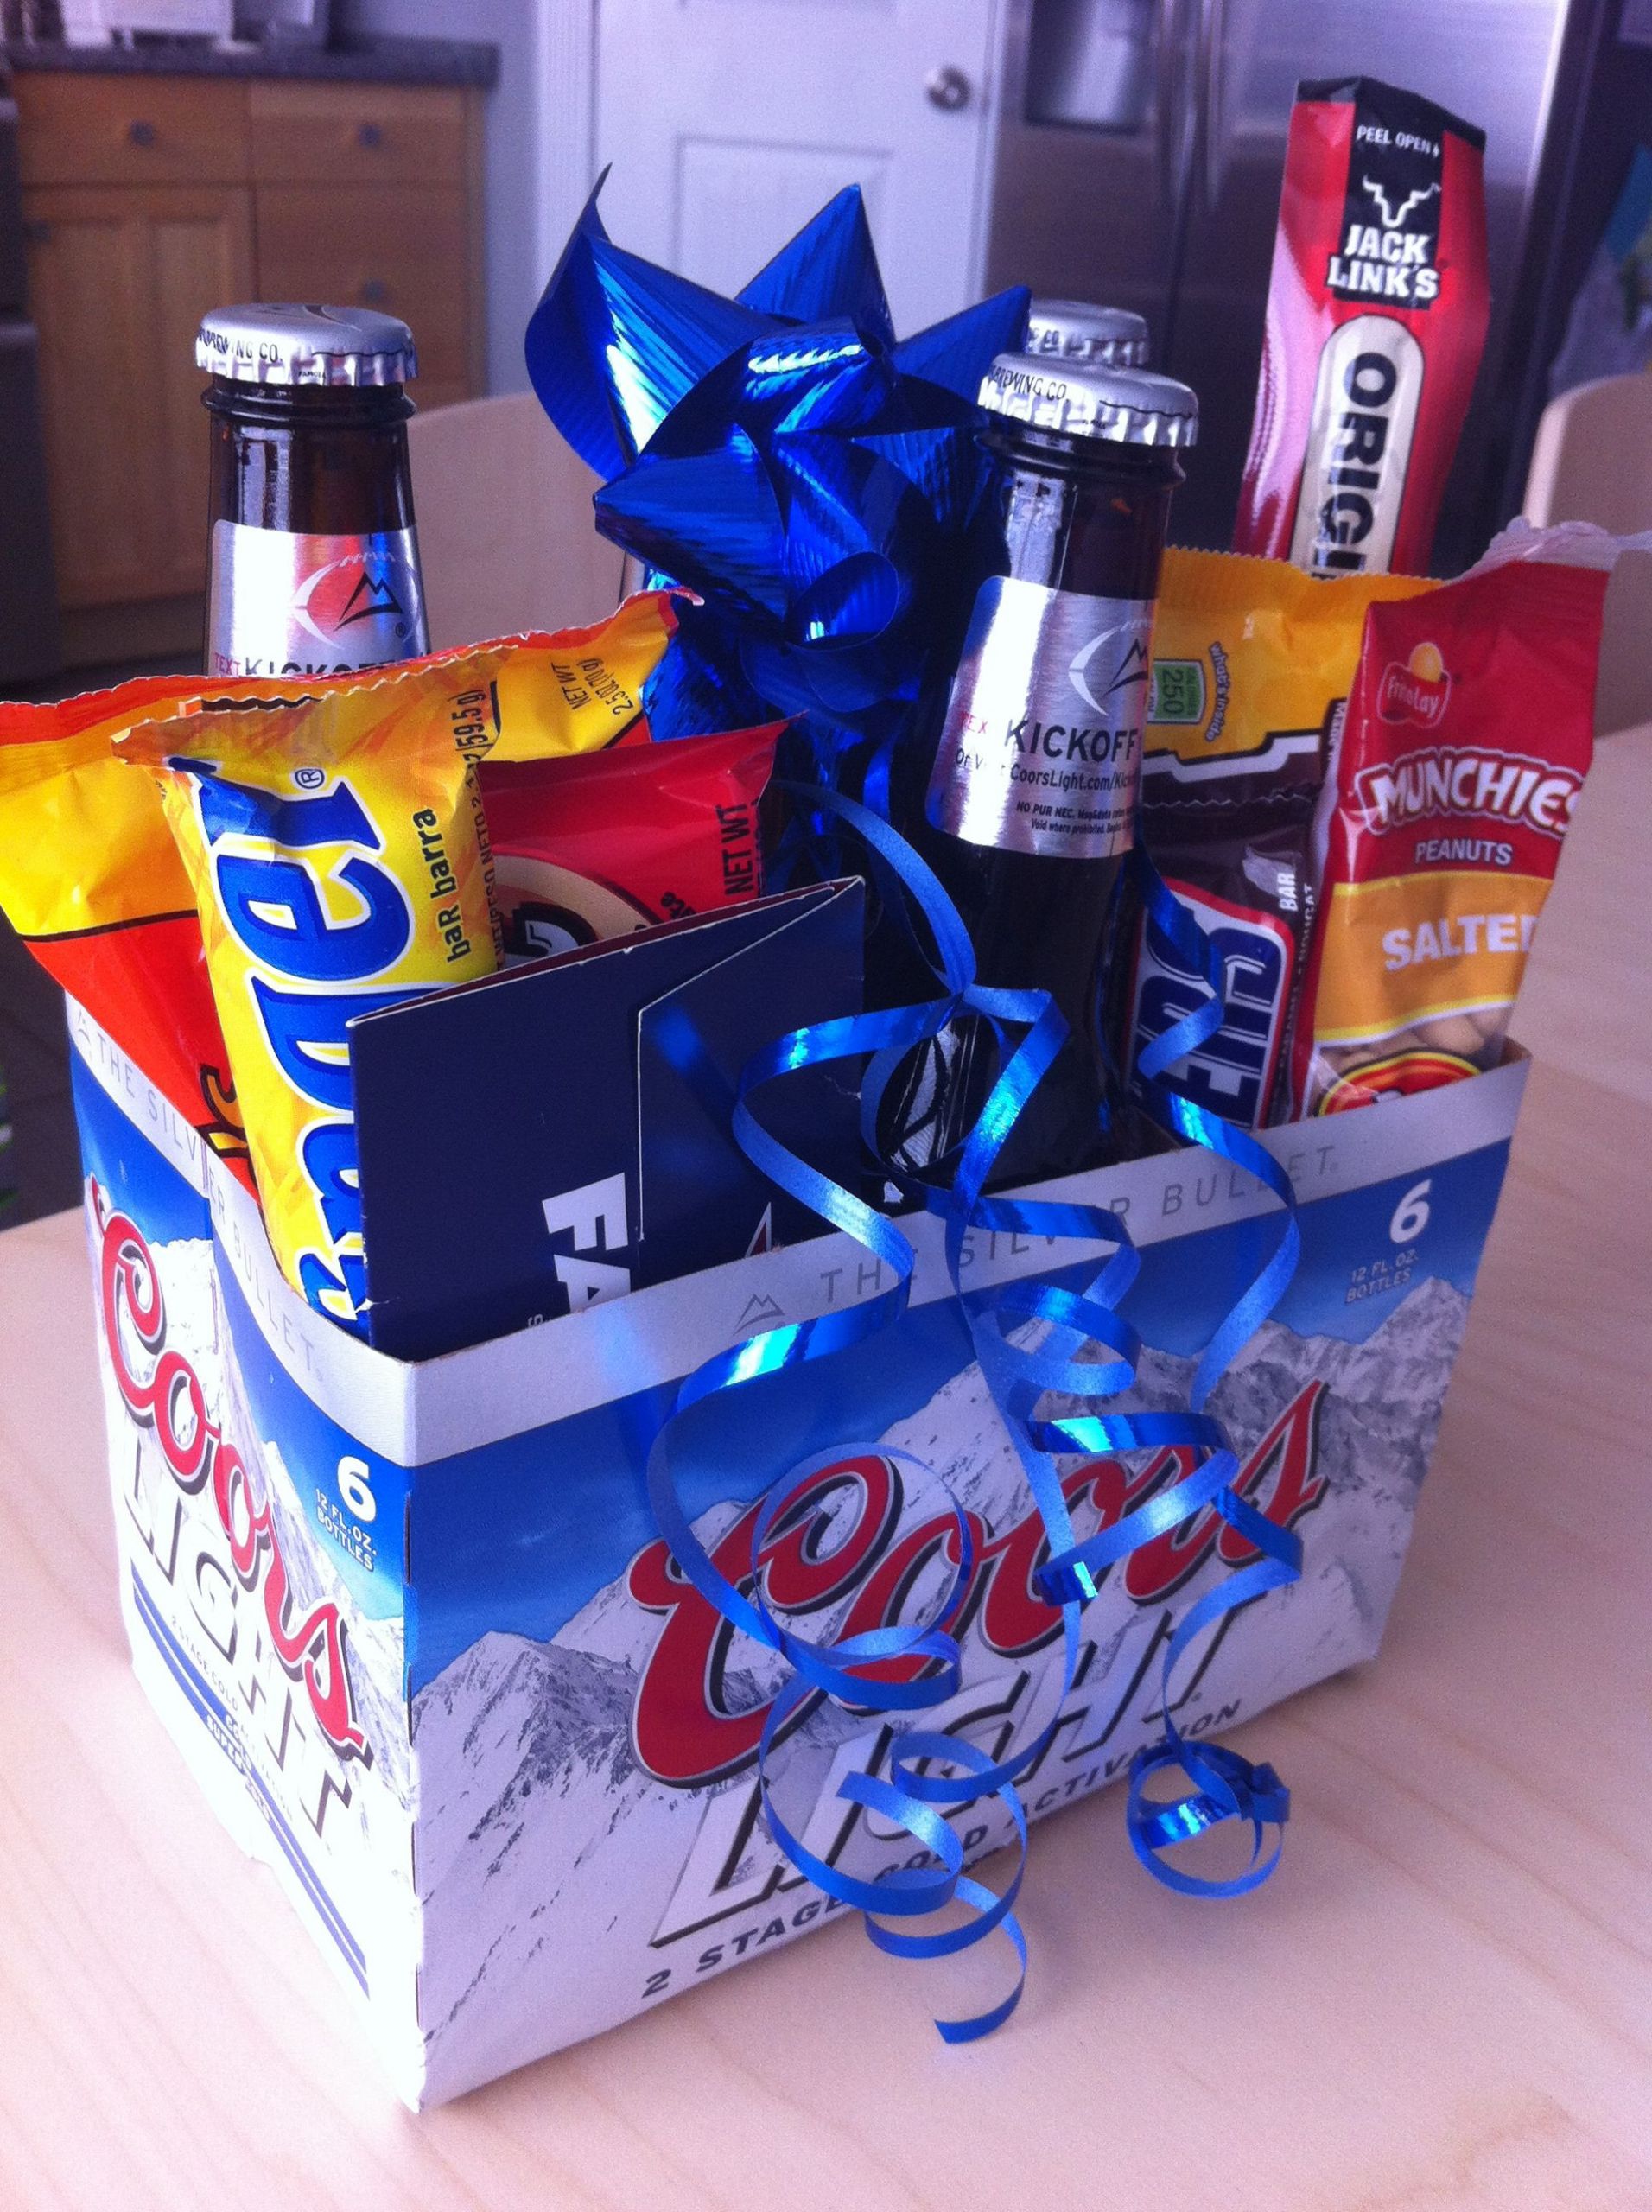 Nice Gift Basket Ideas
 A Great Man Gift Gifts